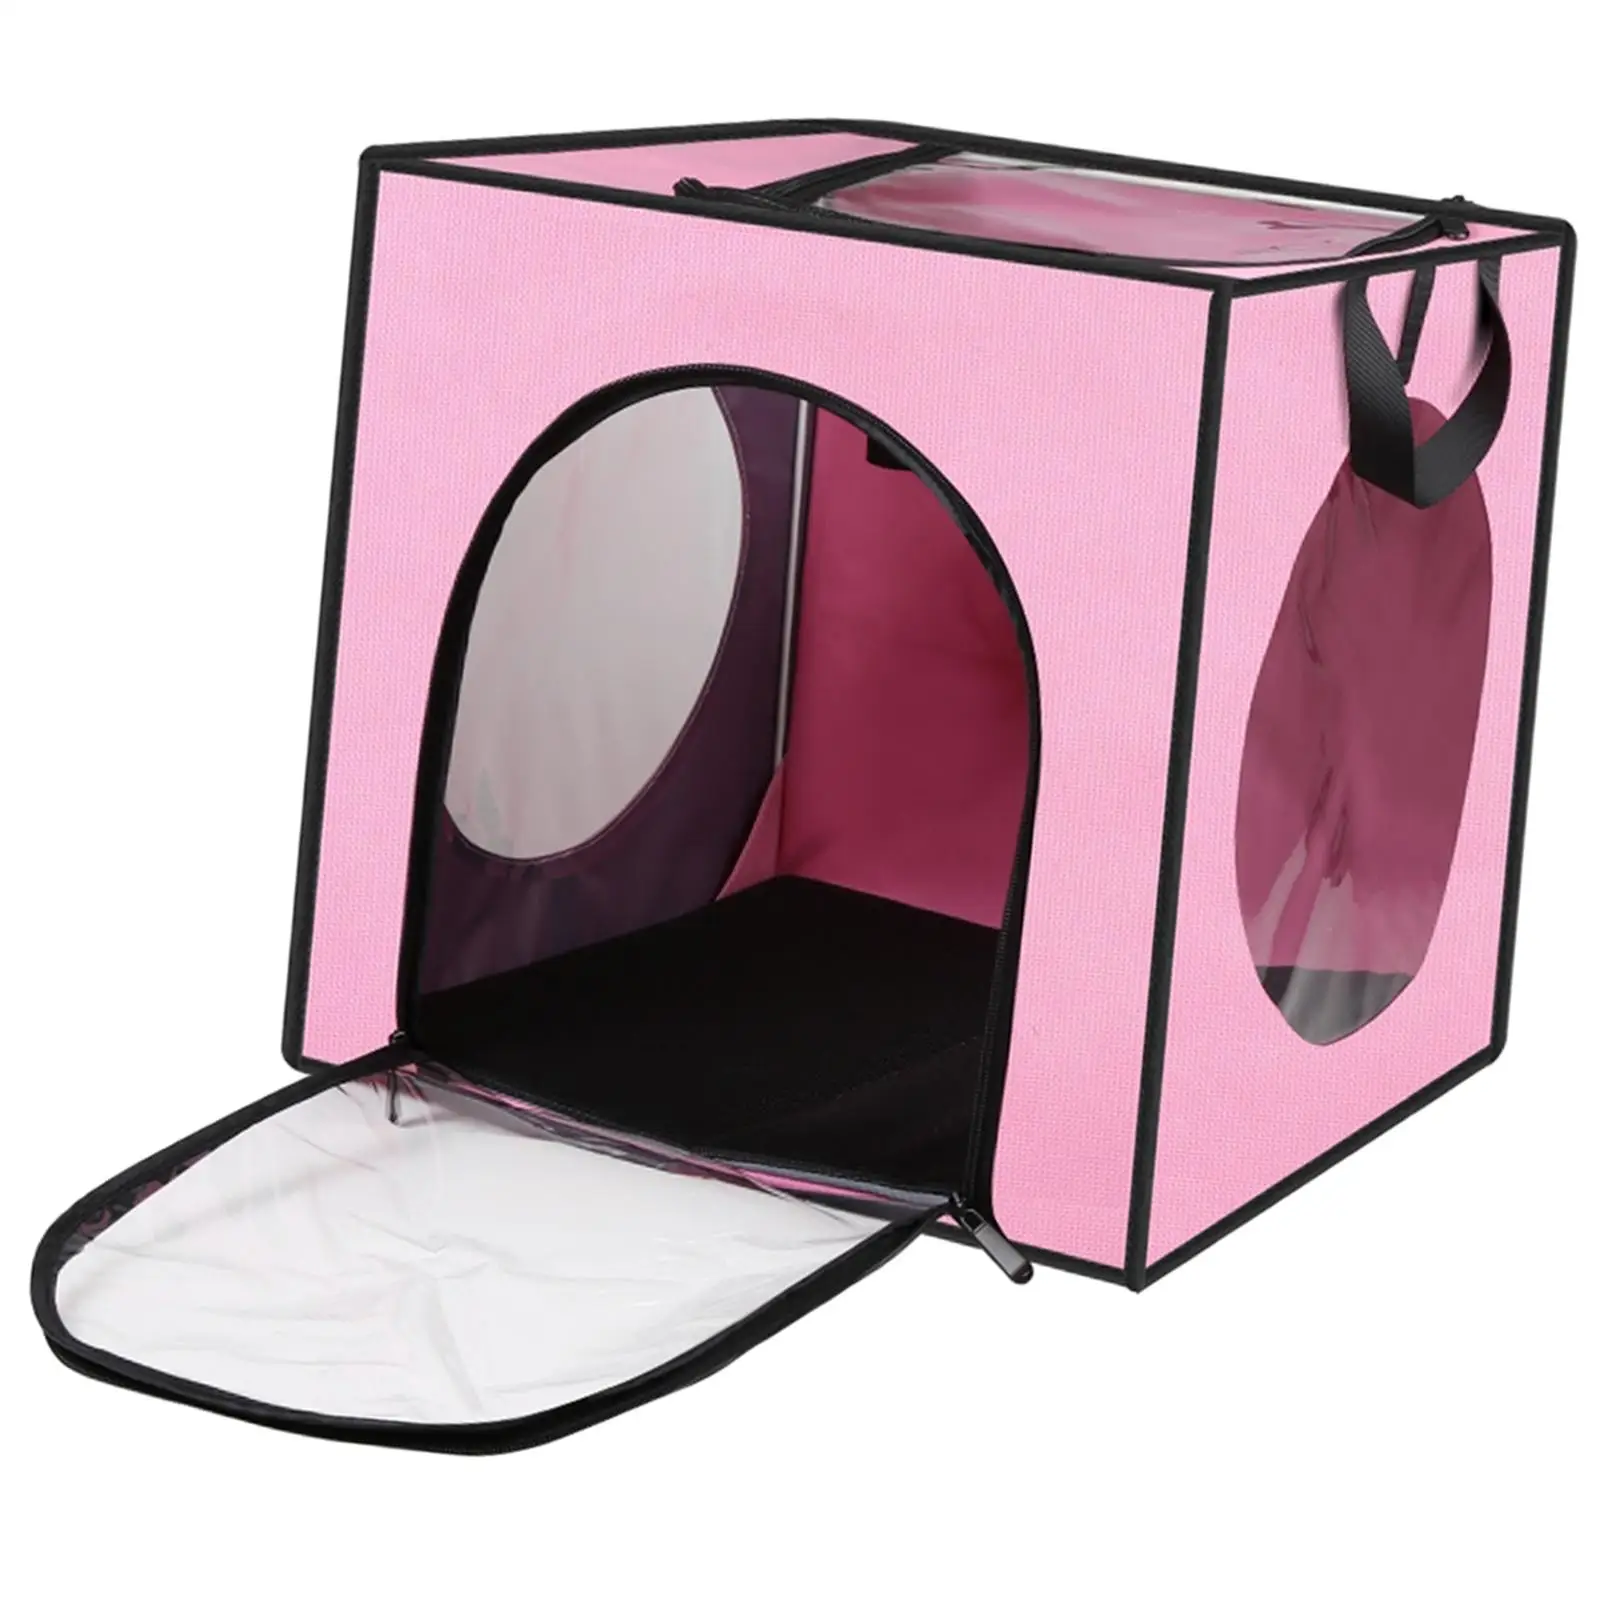 Pet Cats Dogs Hair Drying Box Collapsible Travel Bag Wear Resistance Accessories Ventilation Easily Carry Durable